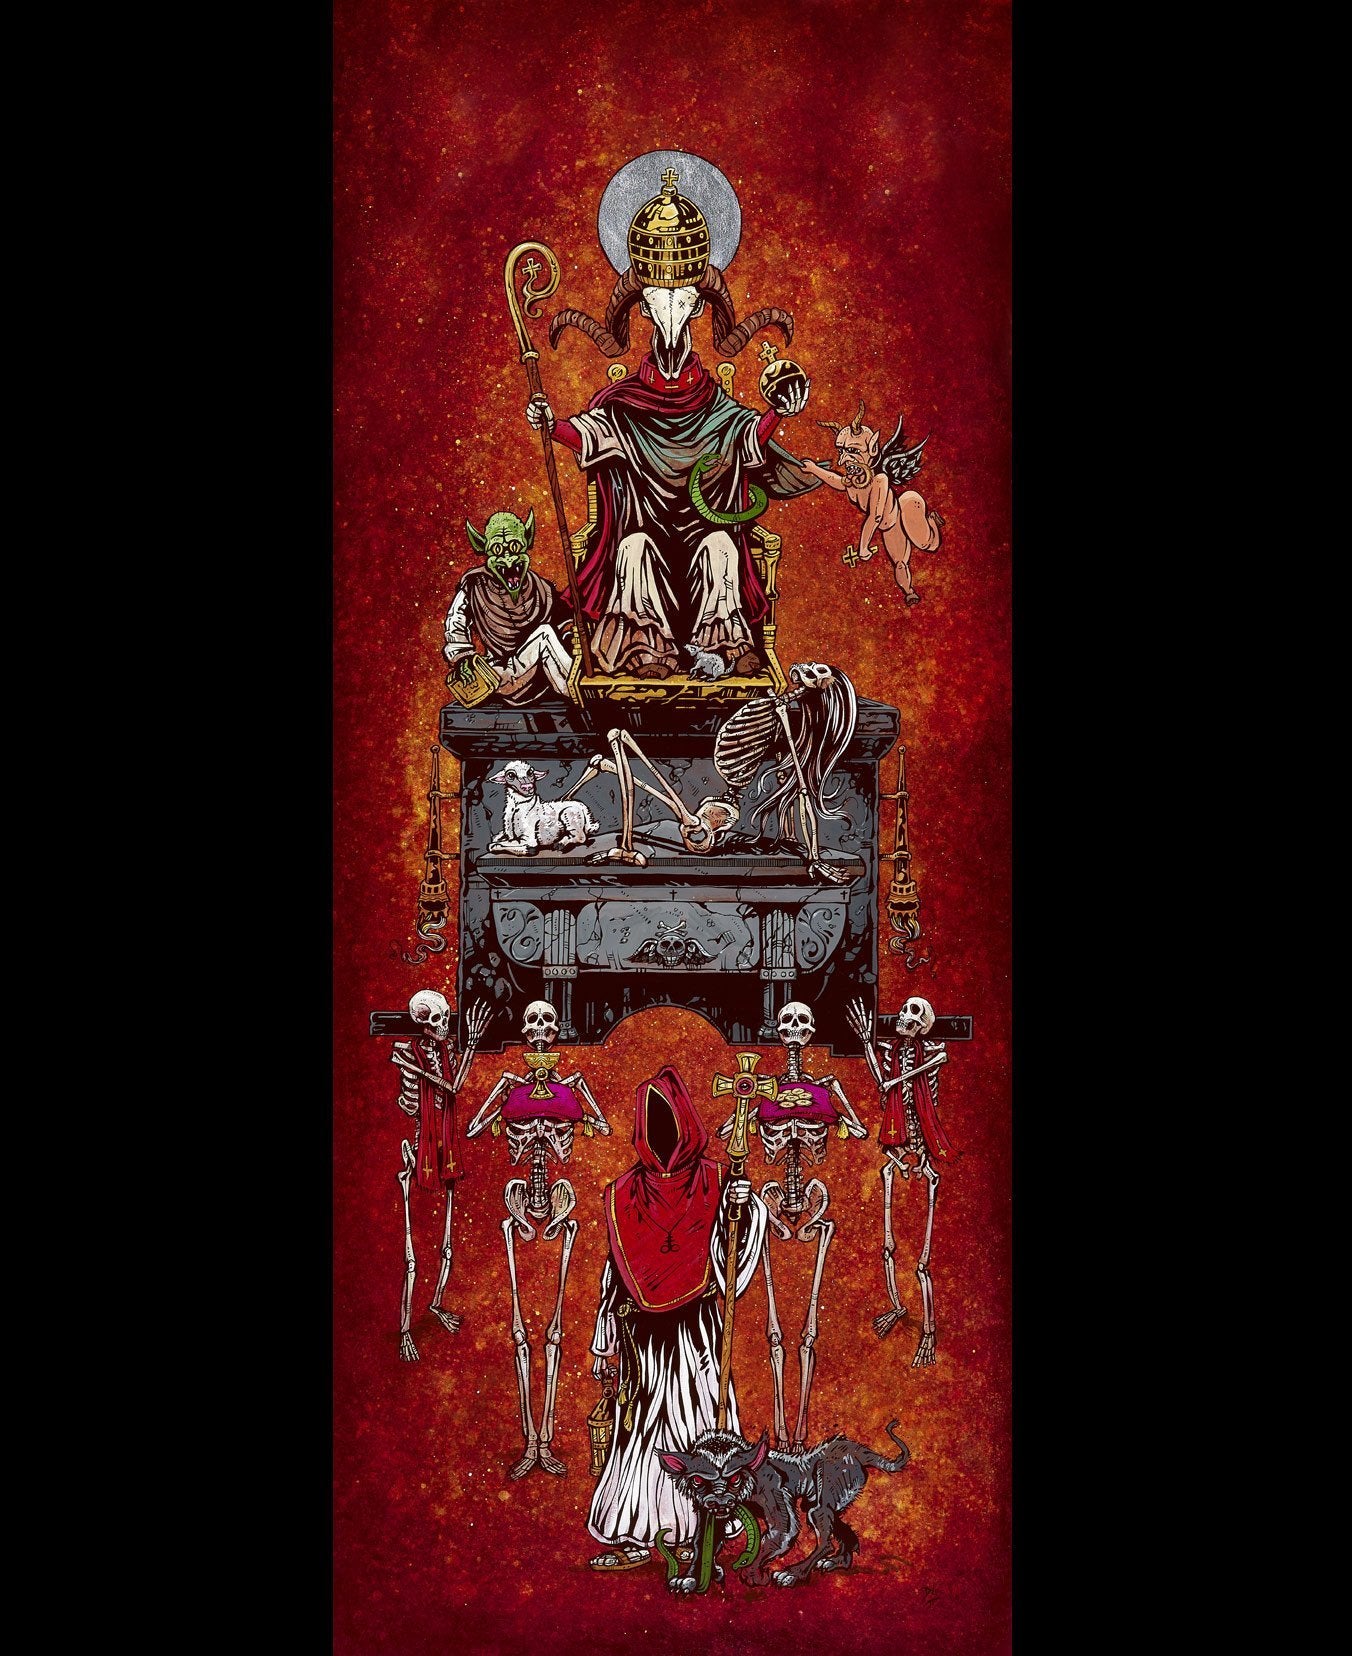 Parade of the False Idol by Day of the Dead Artist David Lozeau, Day of the Dead Art, Dia de los Muertos Art, Dia de los Muertos Artist